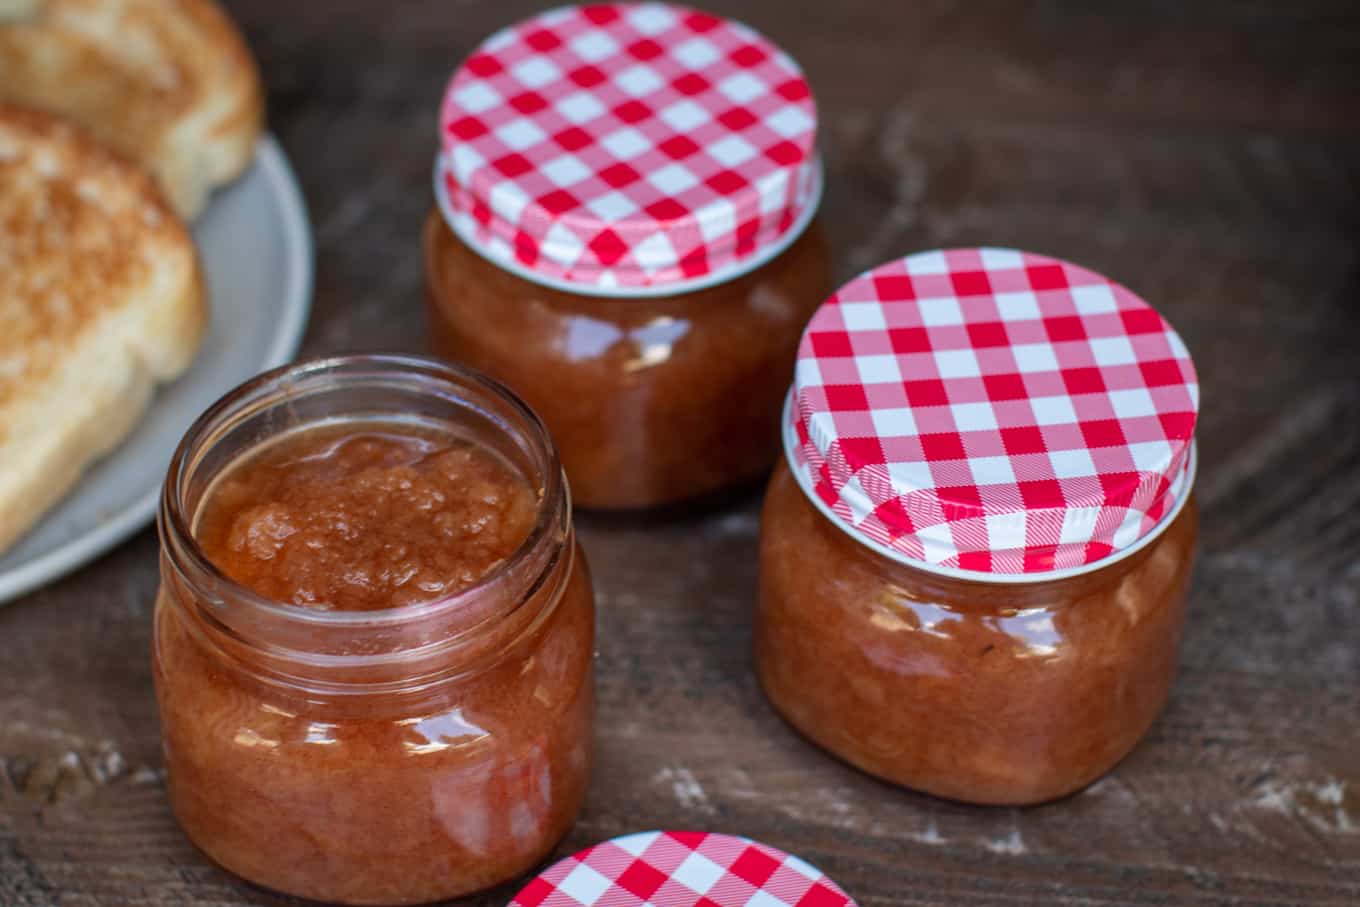 3 jars of apple sauce on a wooden table.